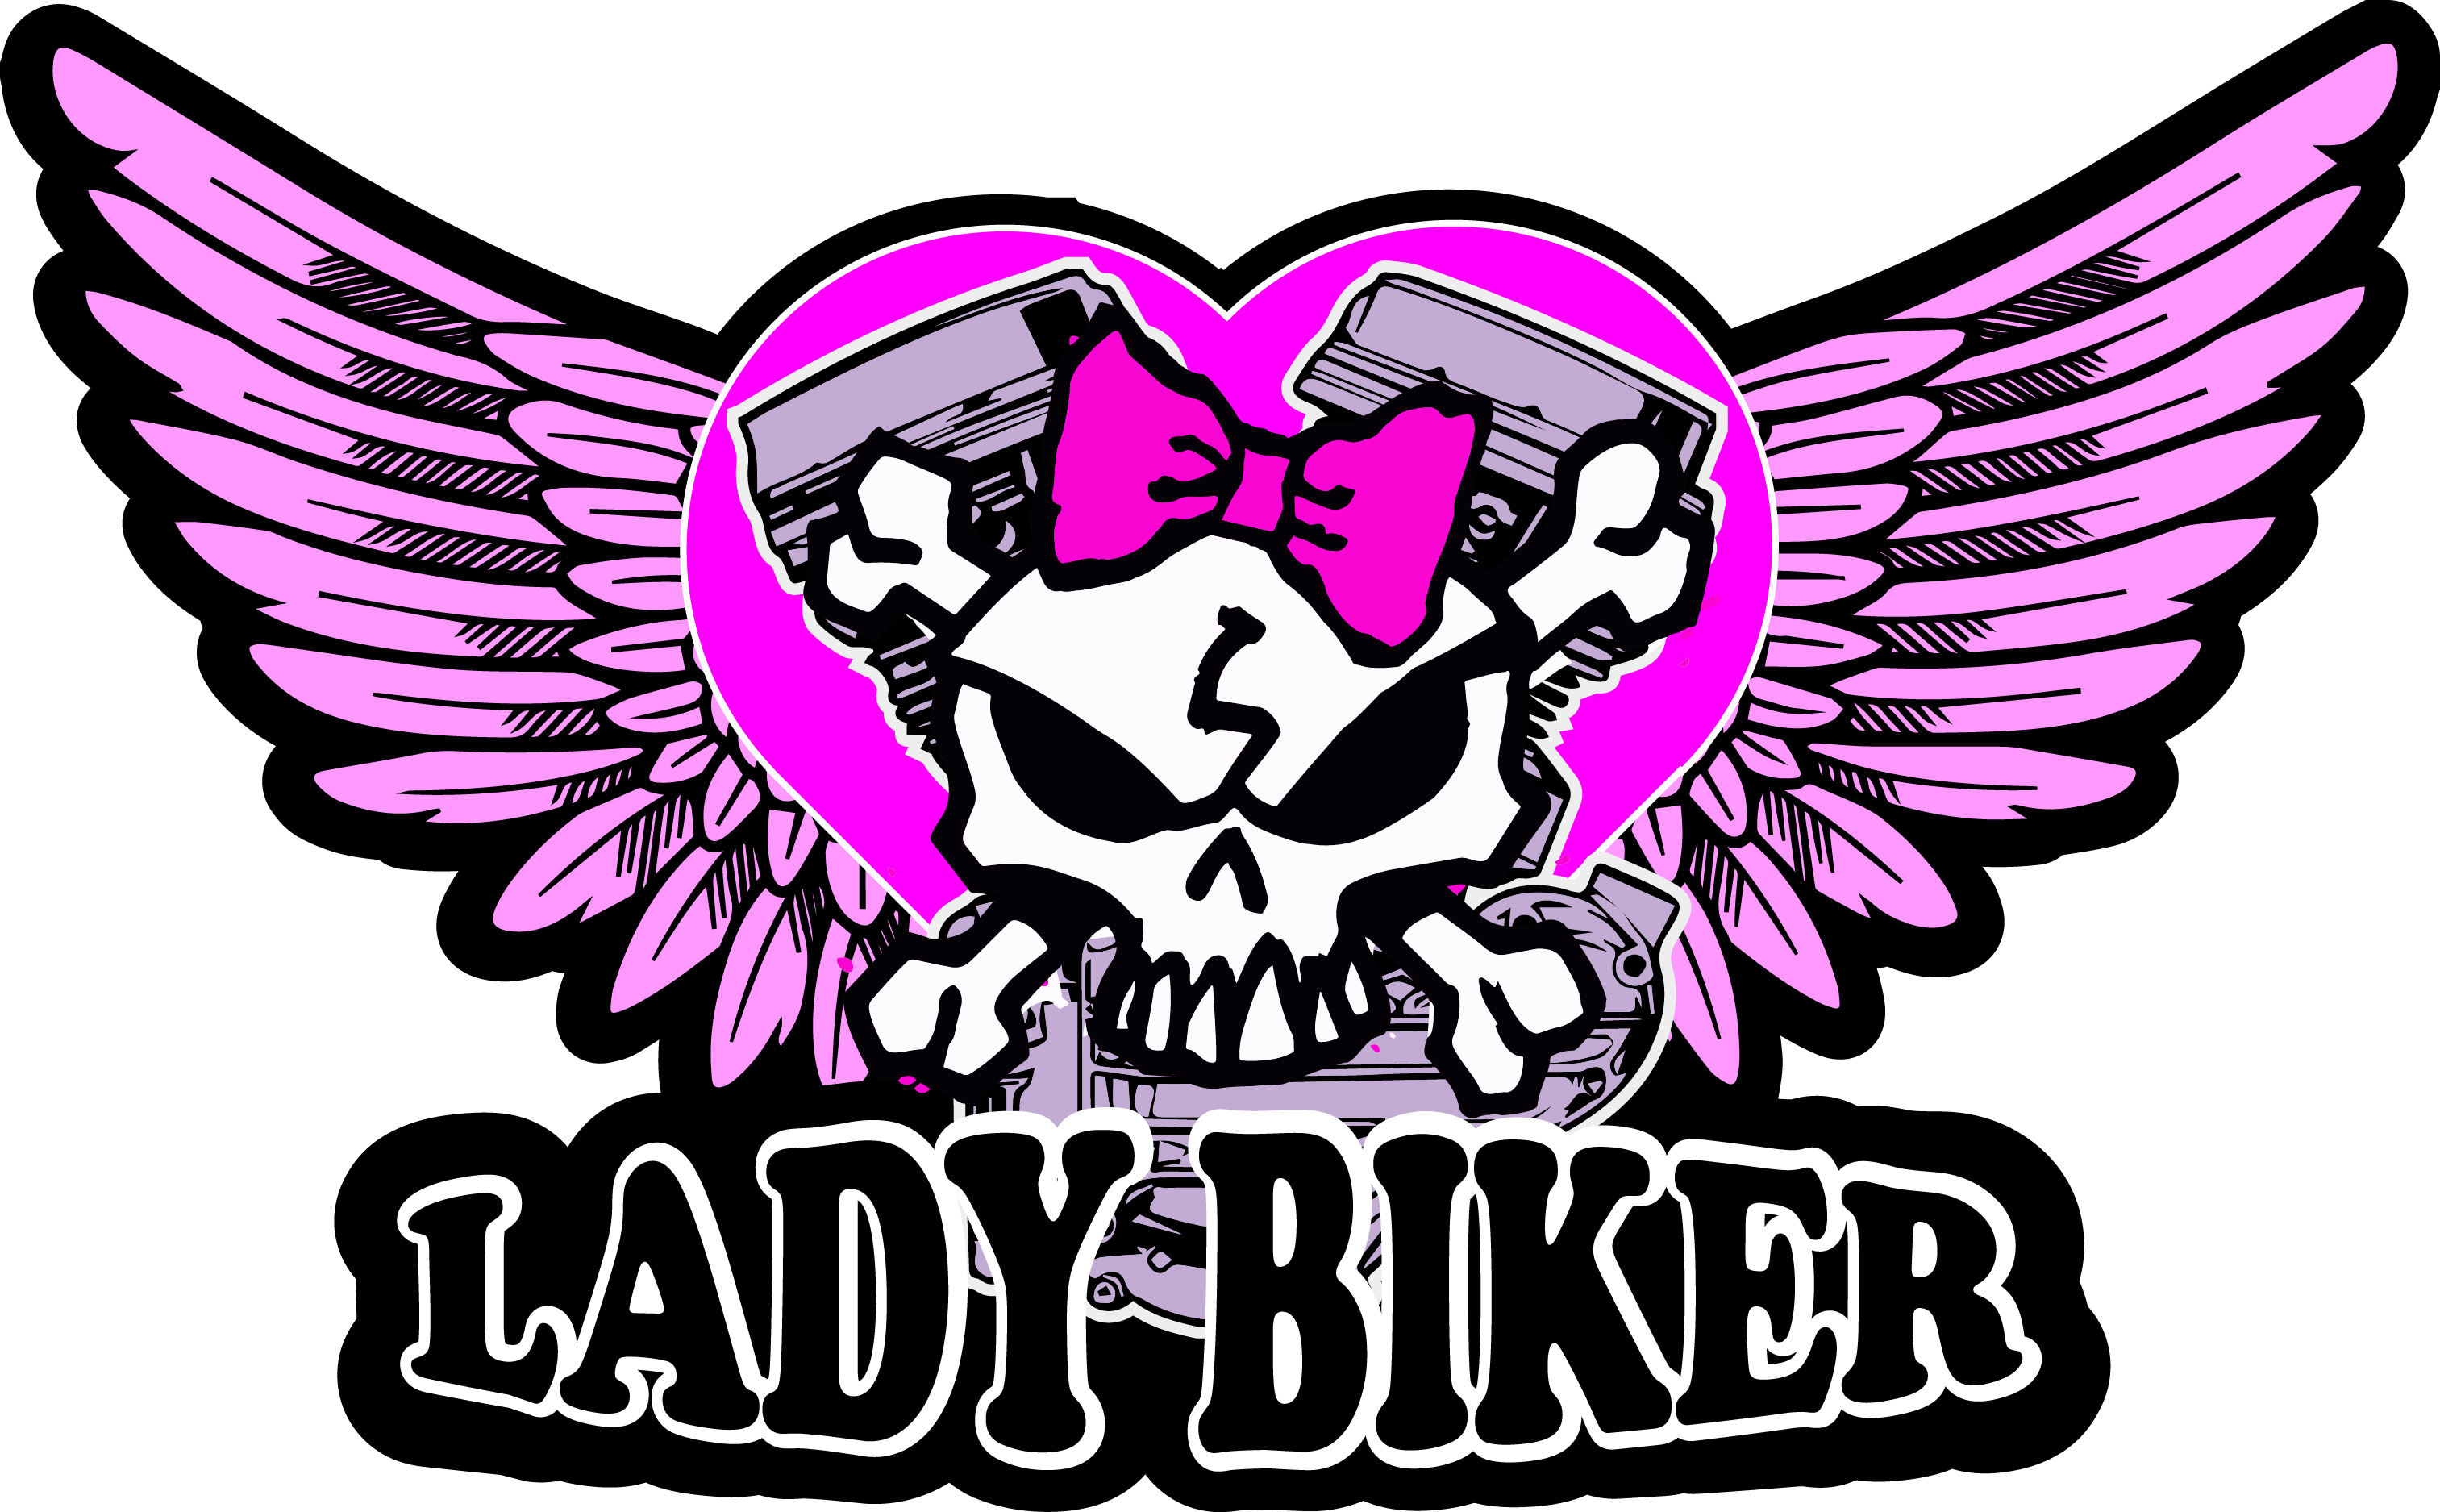 Lady Riders Look At These Patches 6486